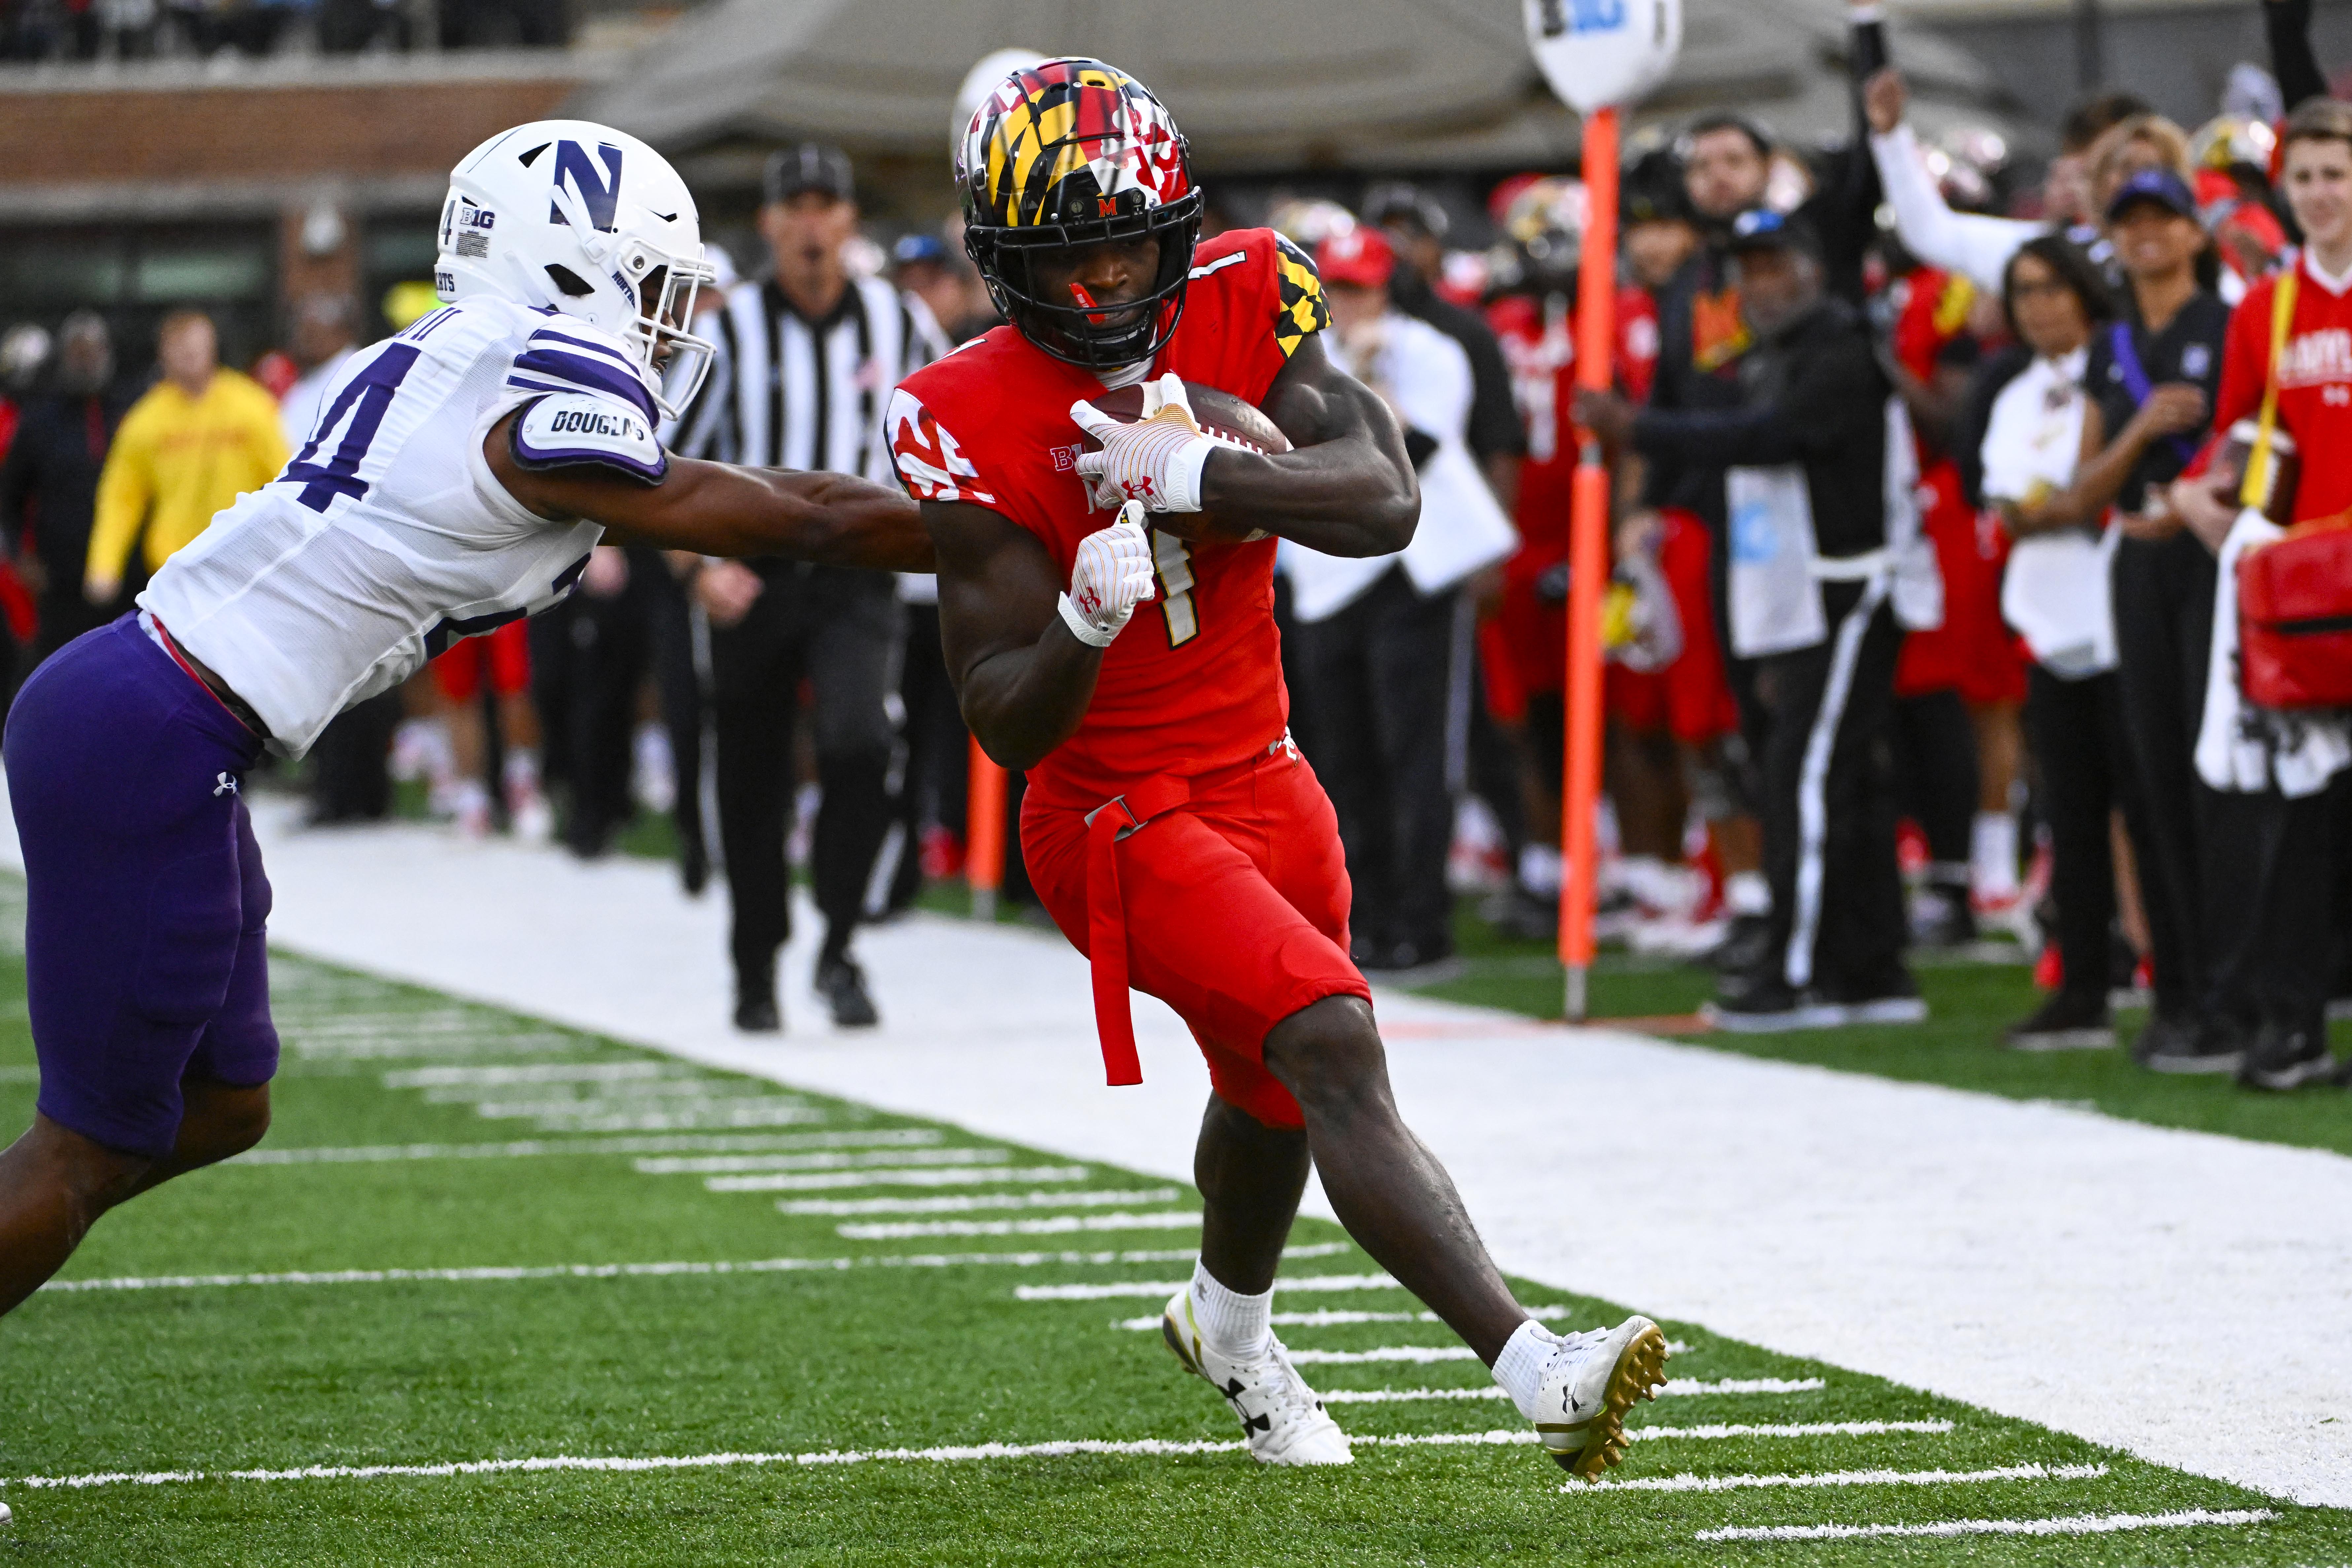 Oct 22, 2022; College Park, Maryland, USA; Maryland Terrapins wide receiver Rakim Jarrett (1) scores a touchdown against the Northwestern Wildcats during the second half at SECU Stadium. Mandatory Credit: Brad Mills-USA TODAY Sports